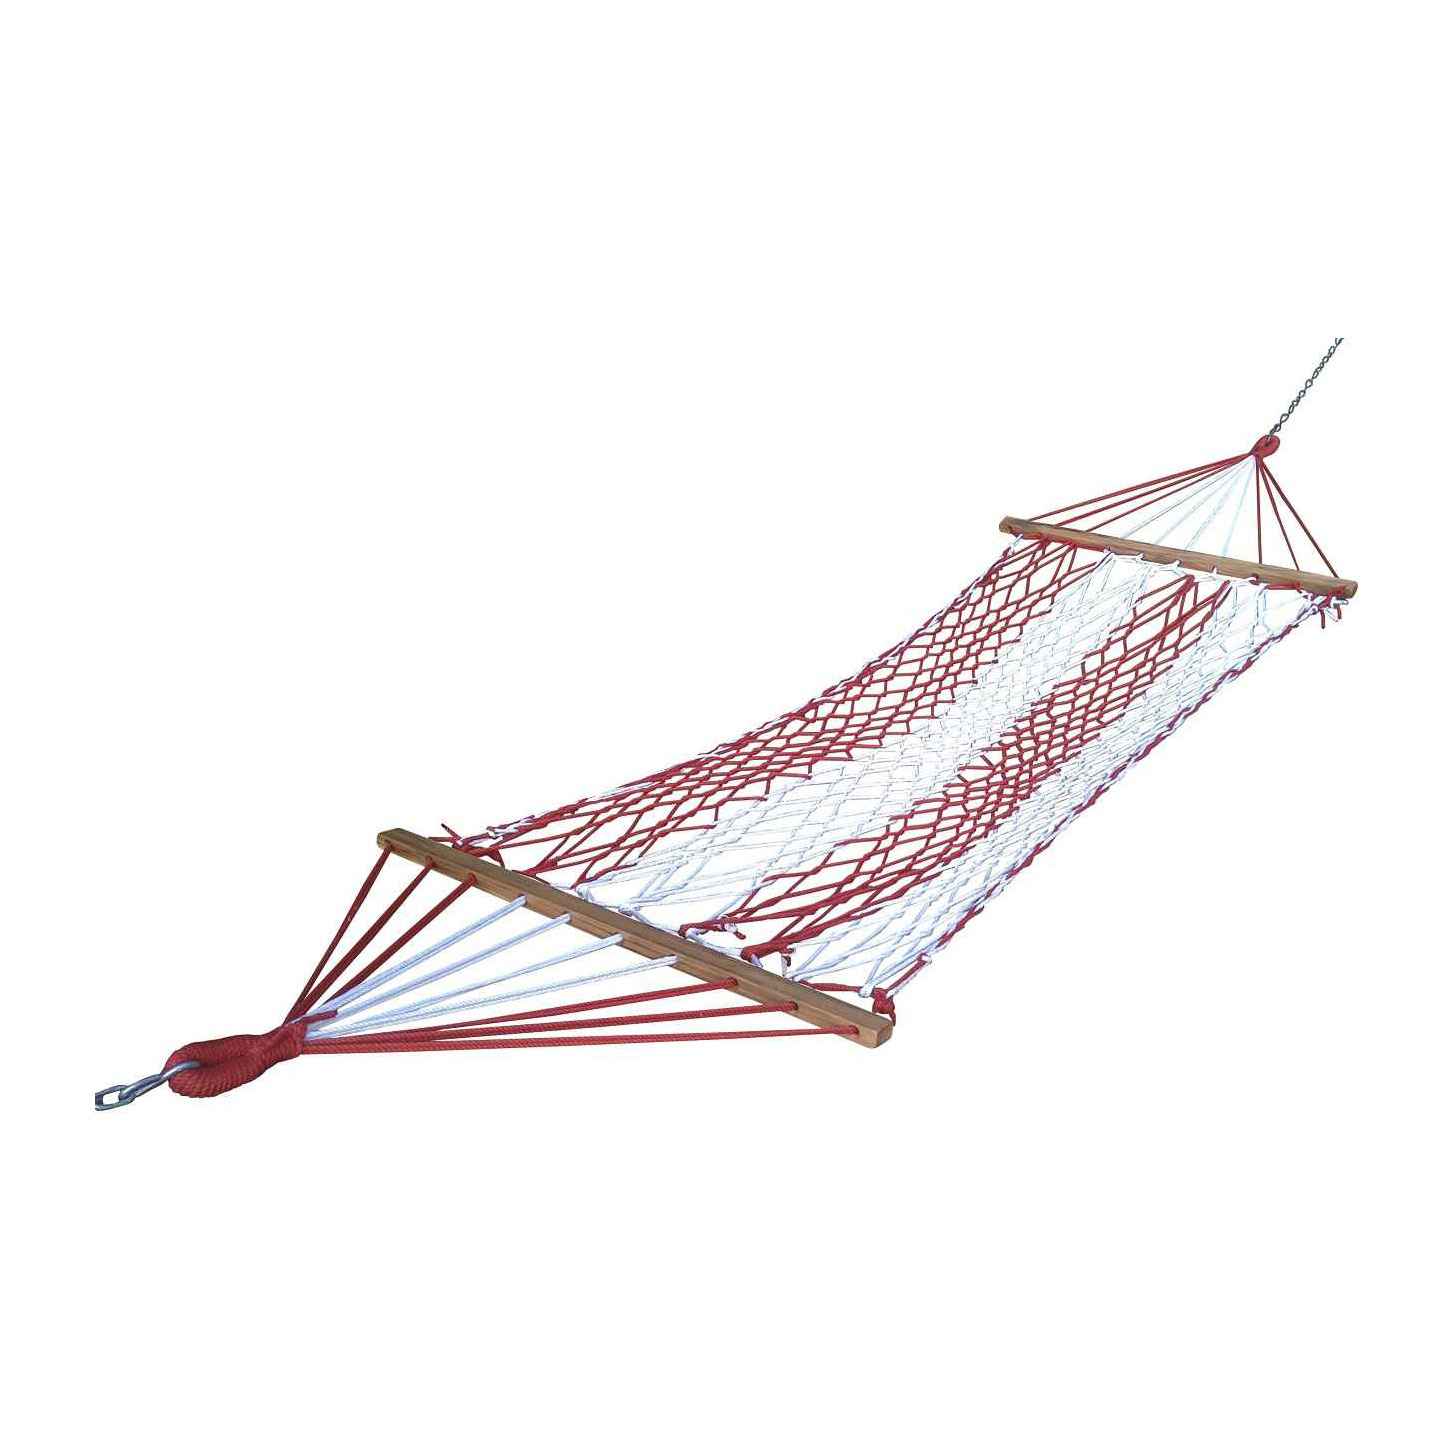 Hangit Durable Thick Canvas Swing with Decorative Crochet